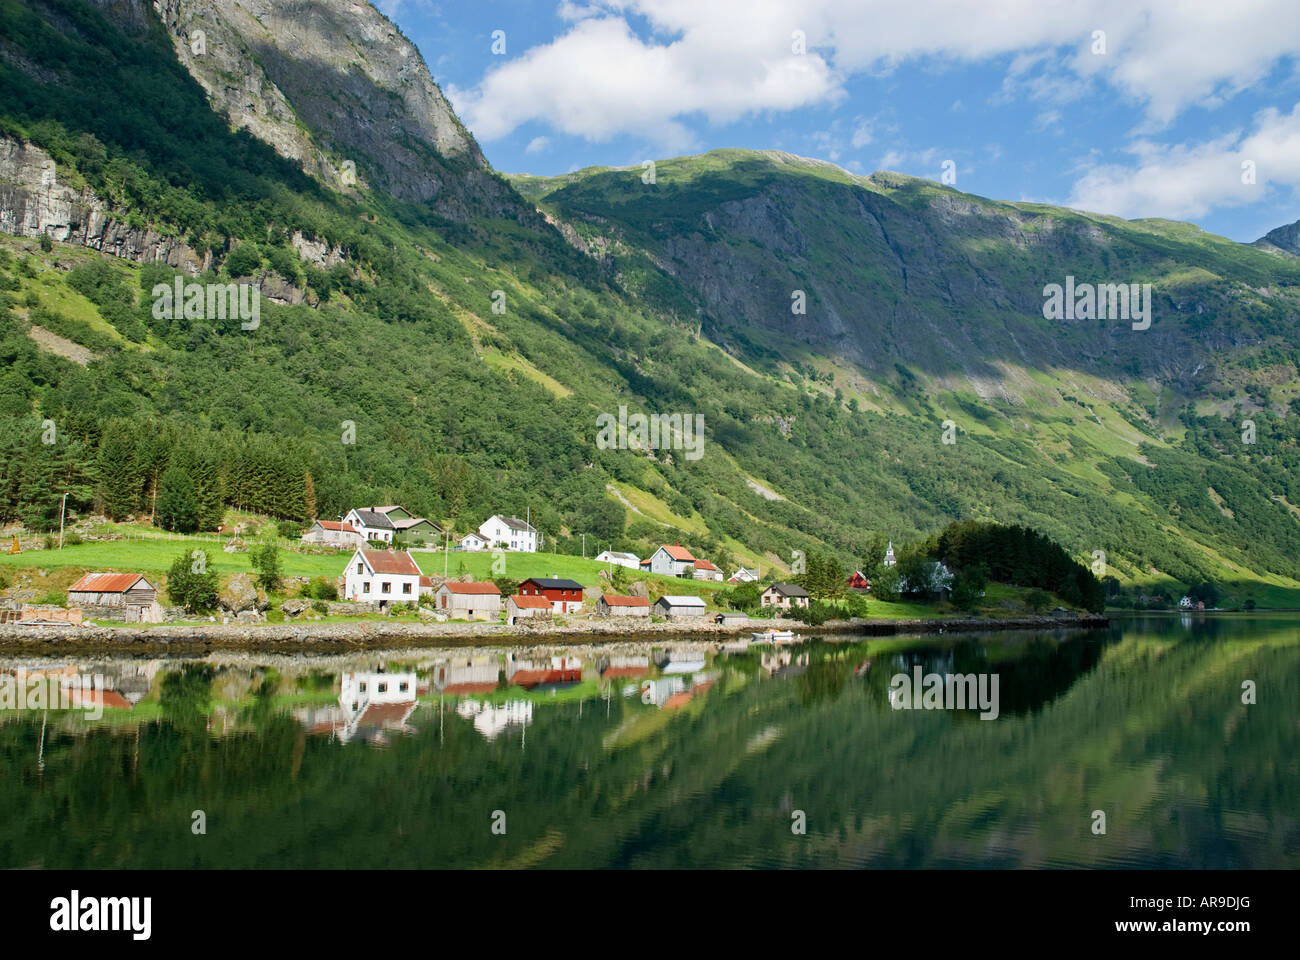 reflection of buildings in water on the shore of Naeroyfjord, near Gudvangen, Norway Stock Photo